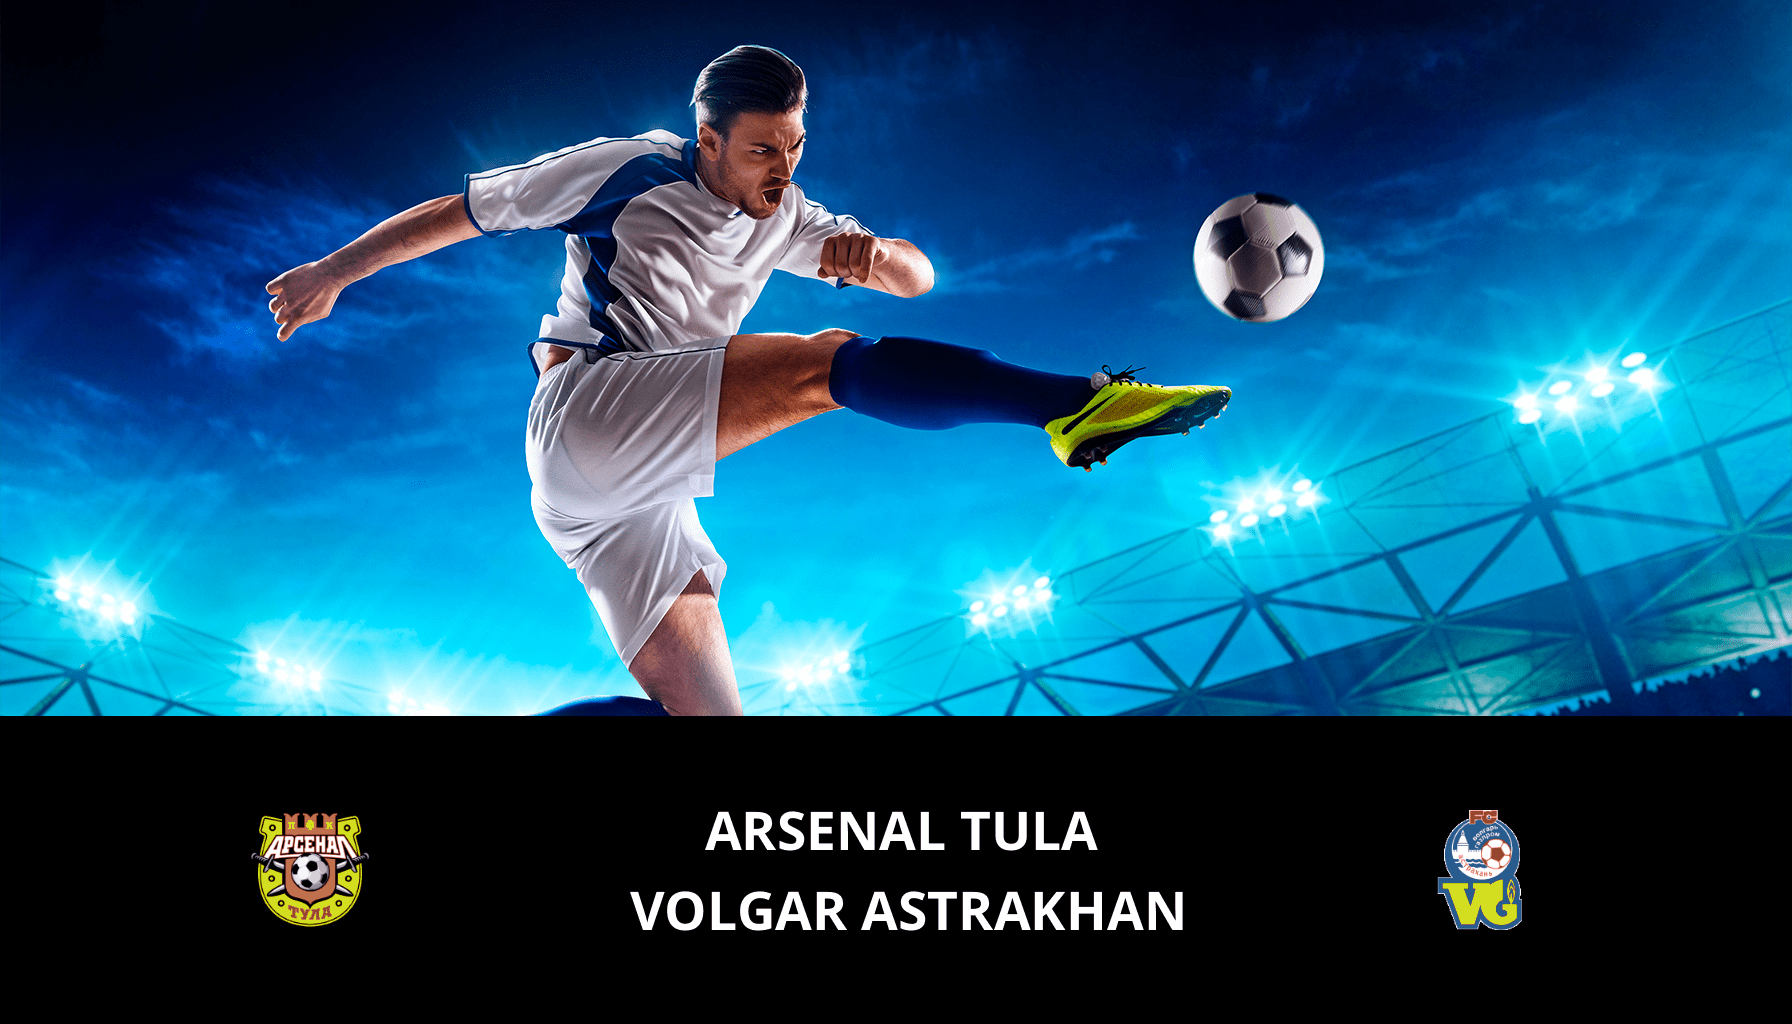 Previsione per Arsenal Tula VS Volgar Astrakhan il 18/03/2024 Analysis of the match